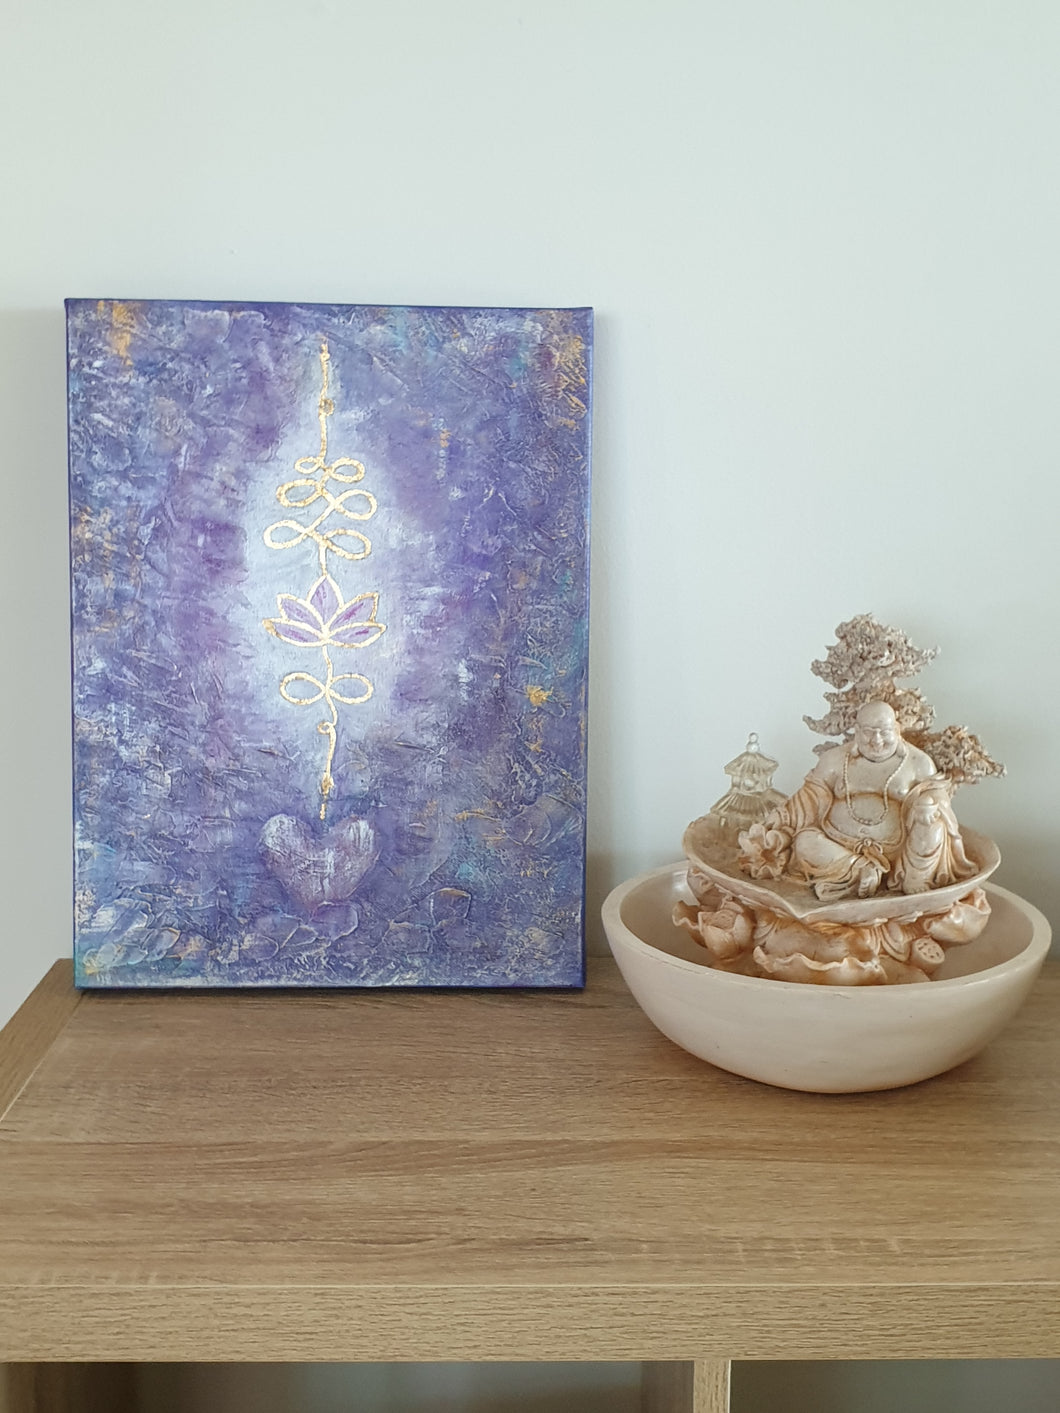 Original painting of a unalome power symbol in gold leaf on an abstract background